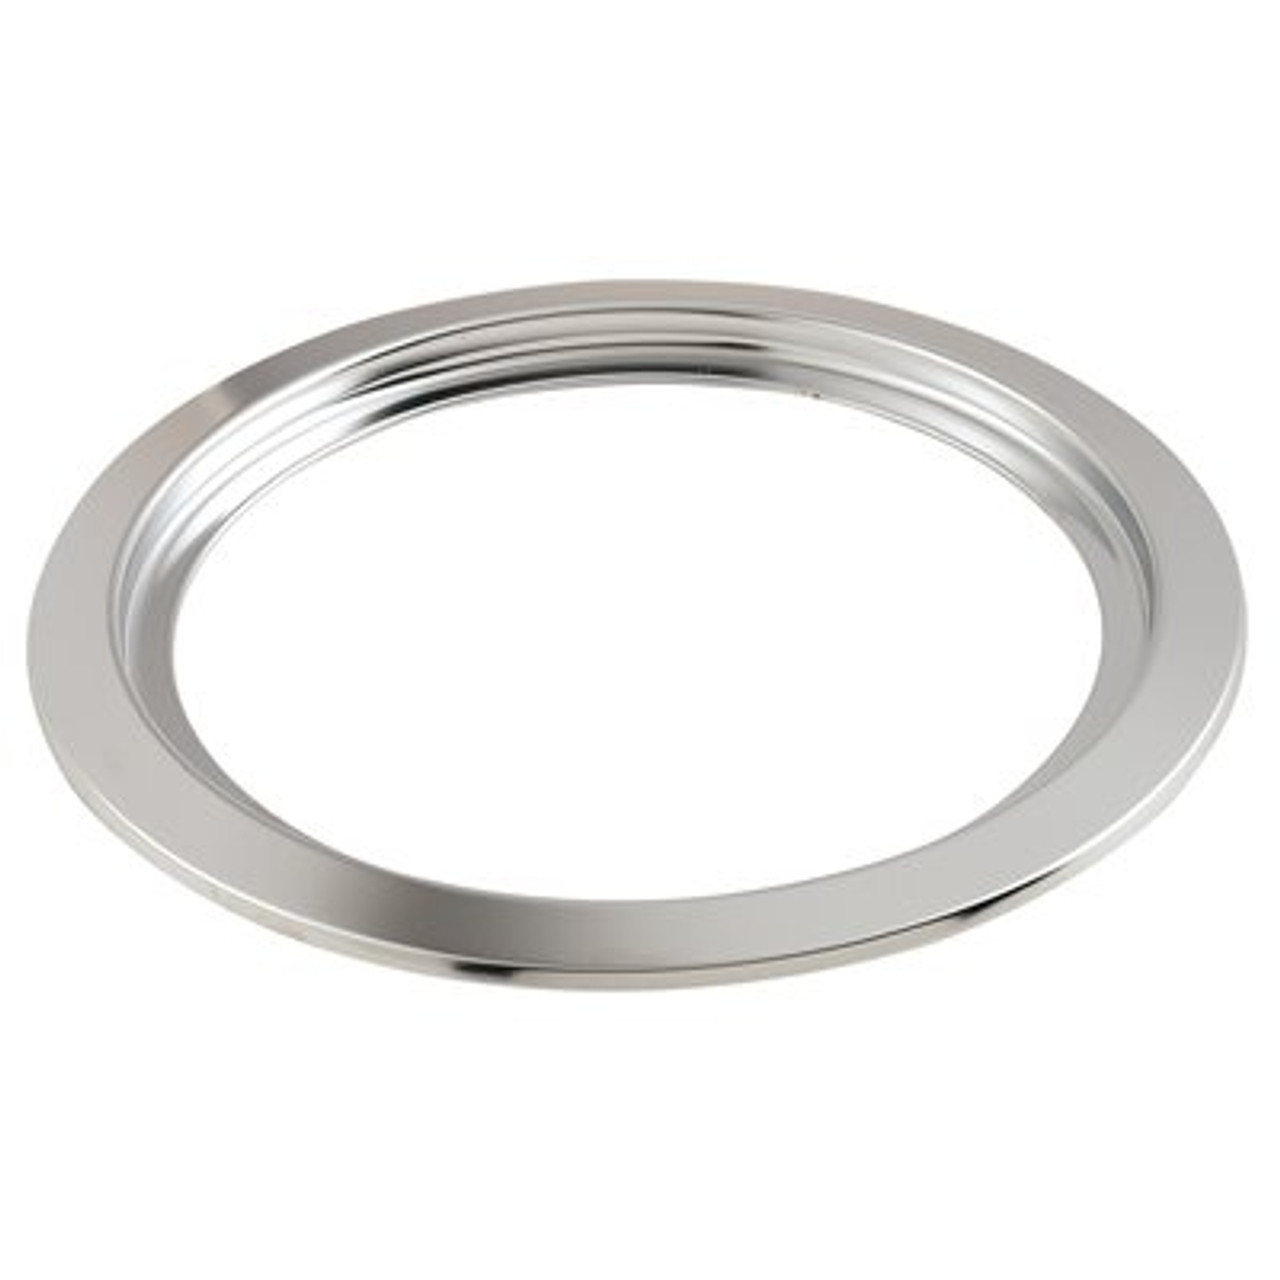 HOTPOINT Hotpoint 6" Drip Pan Ring Package Of 6